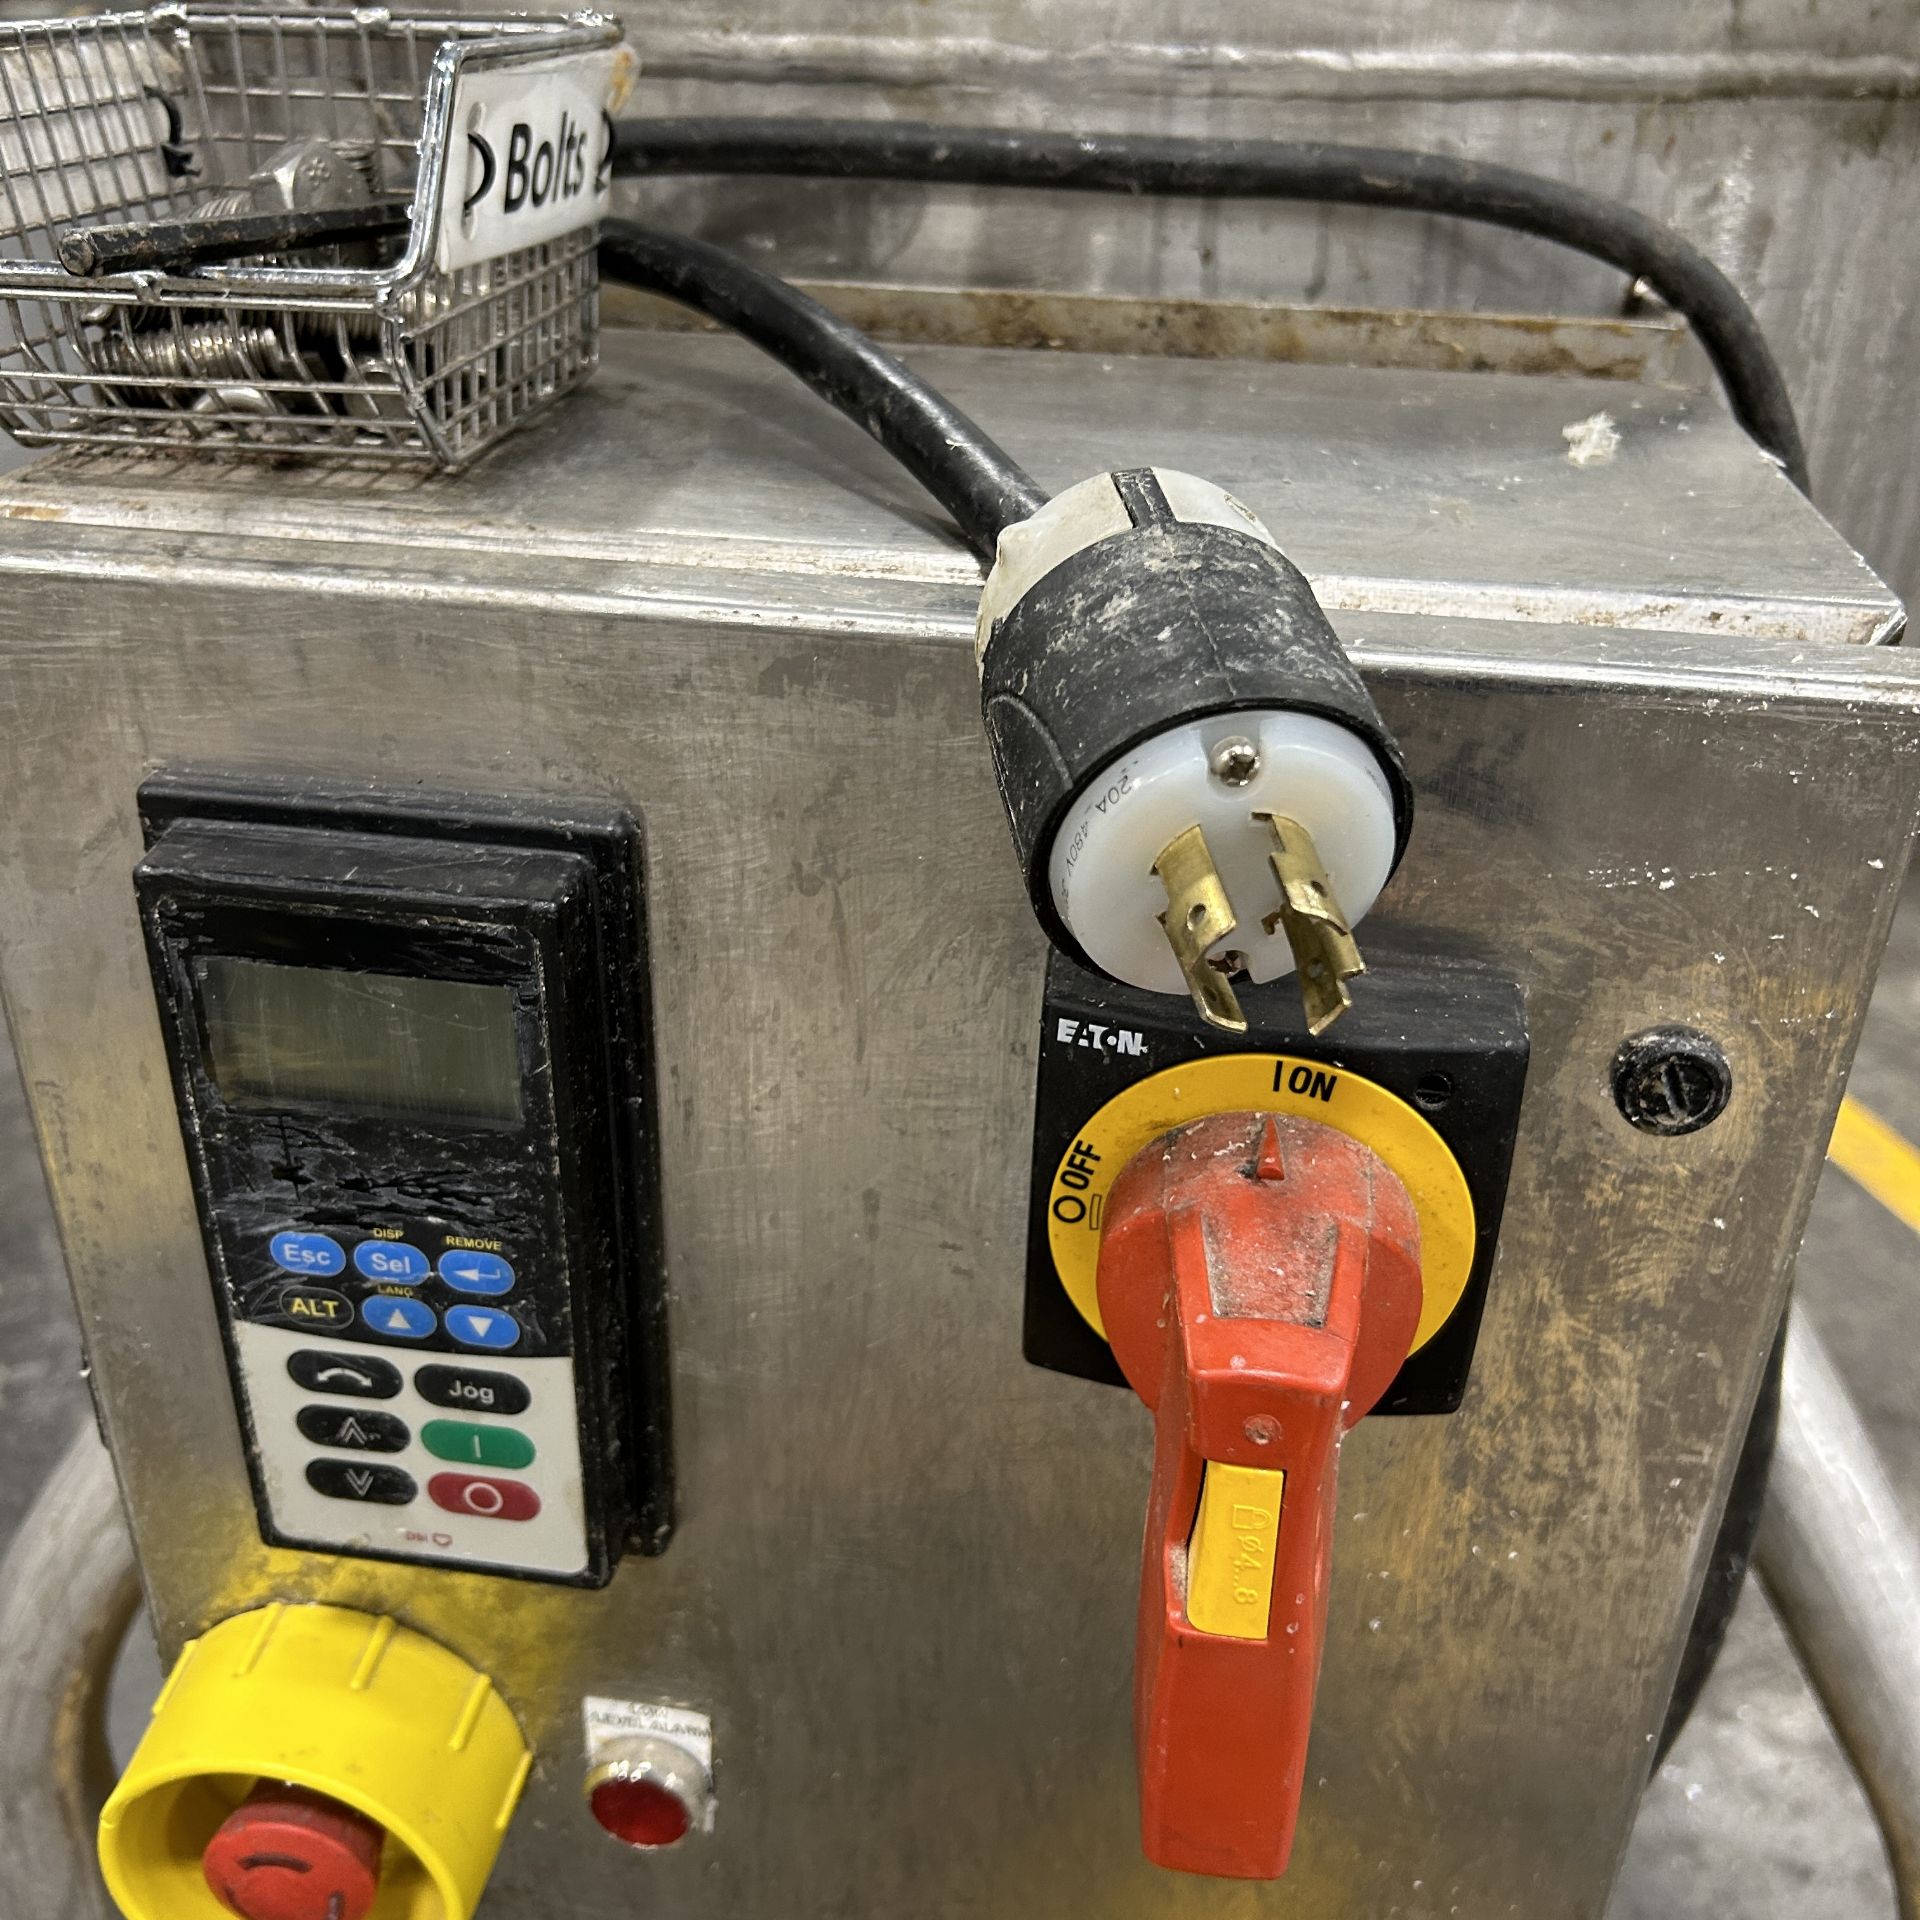 2019 Amherst Stainless Steel Agitation Pressure Pot - Image 8 of 12